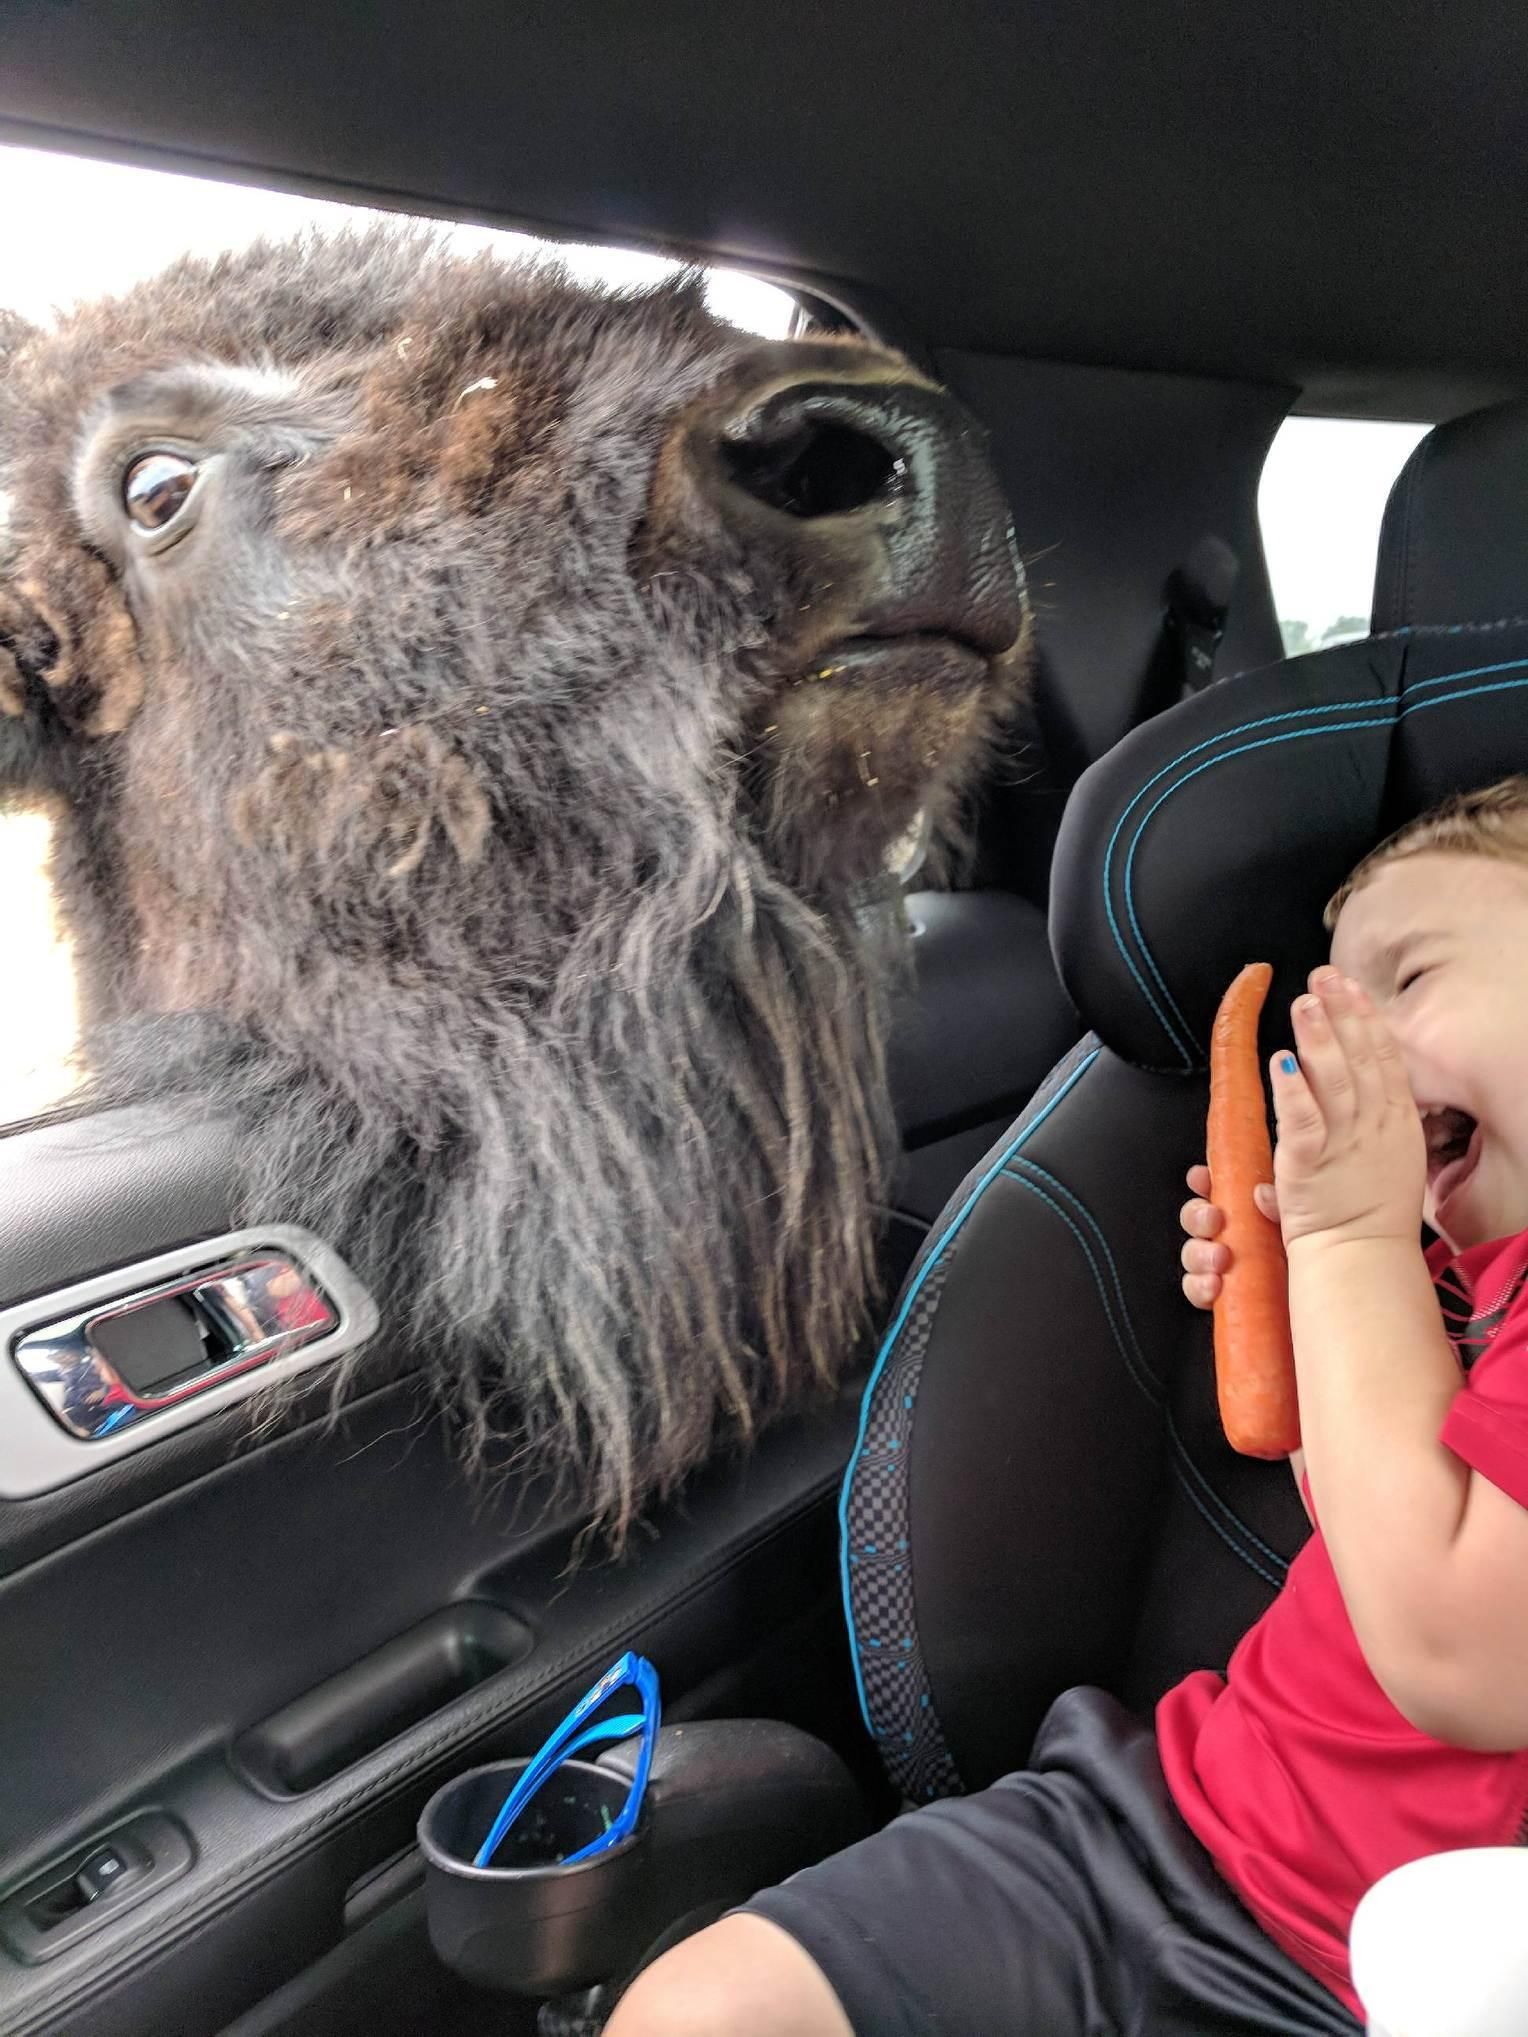 My nephew met a bison the other day